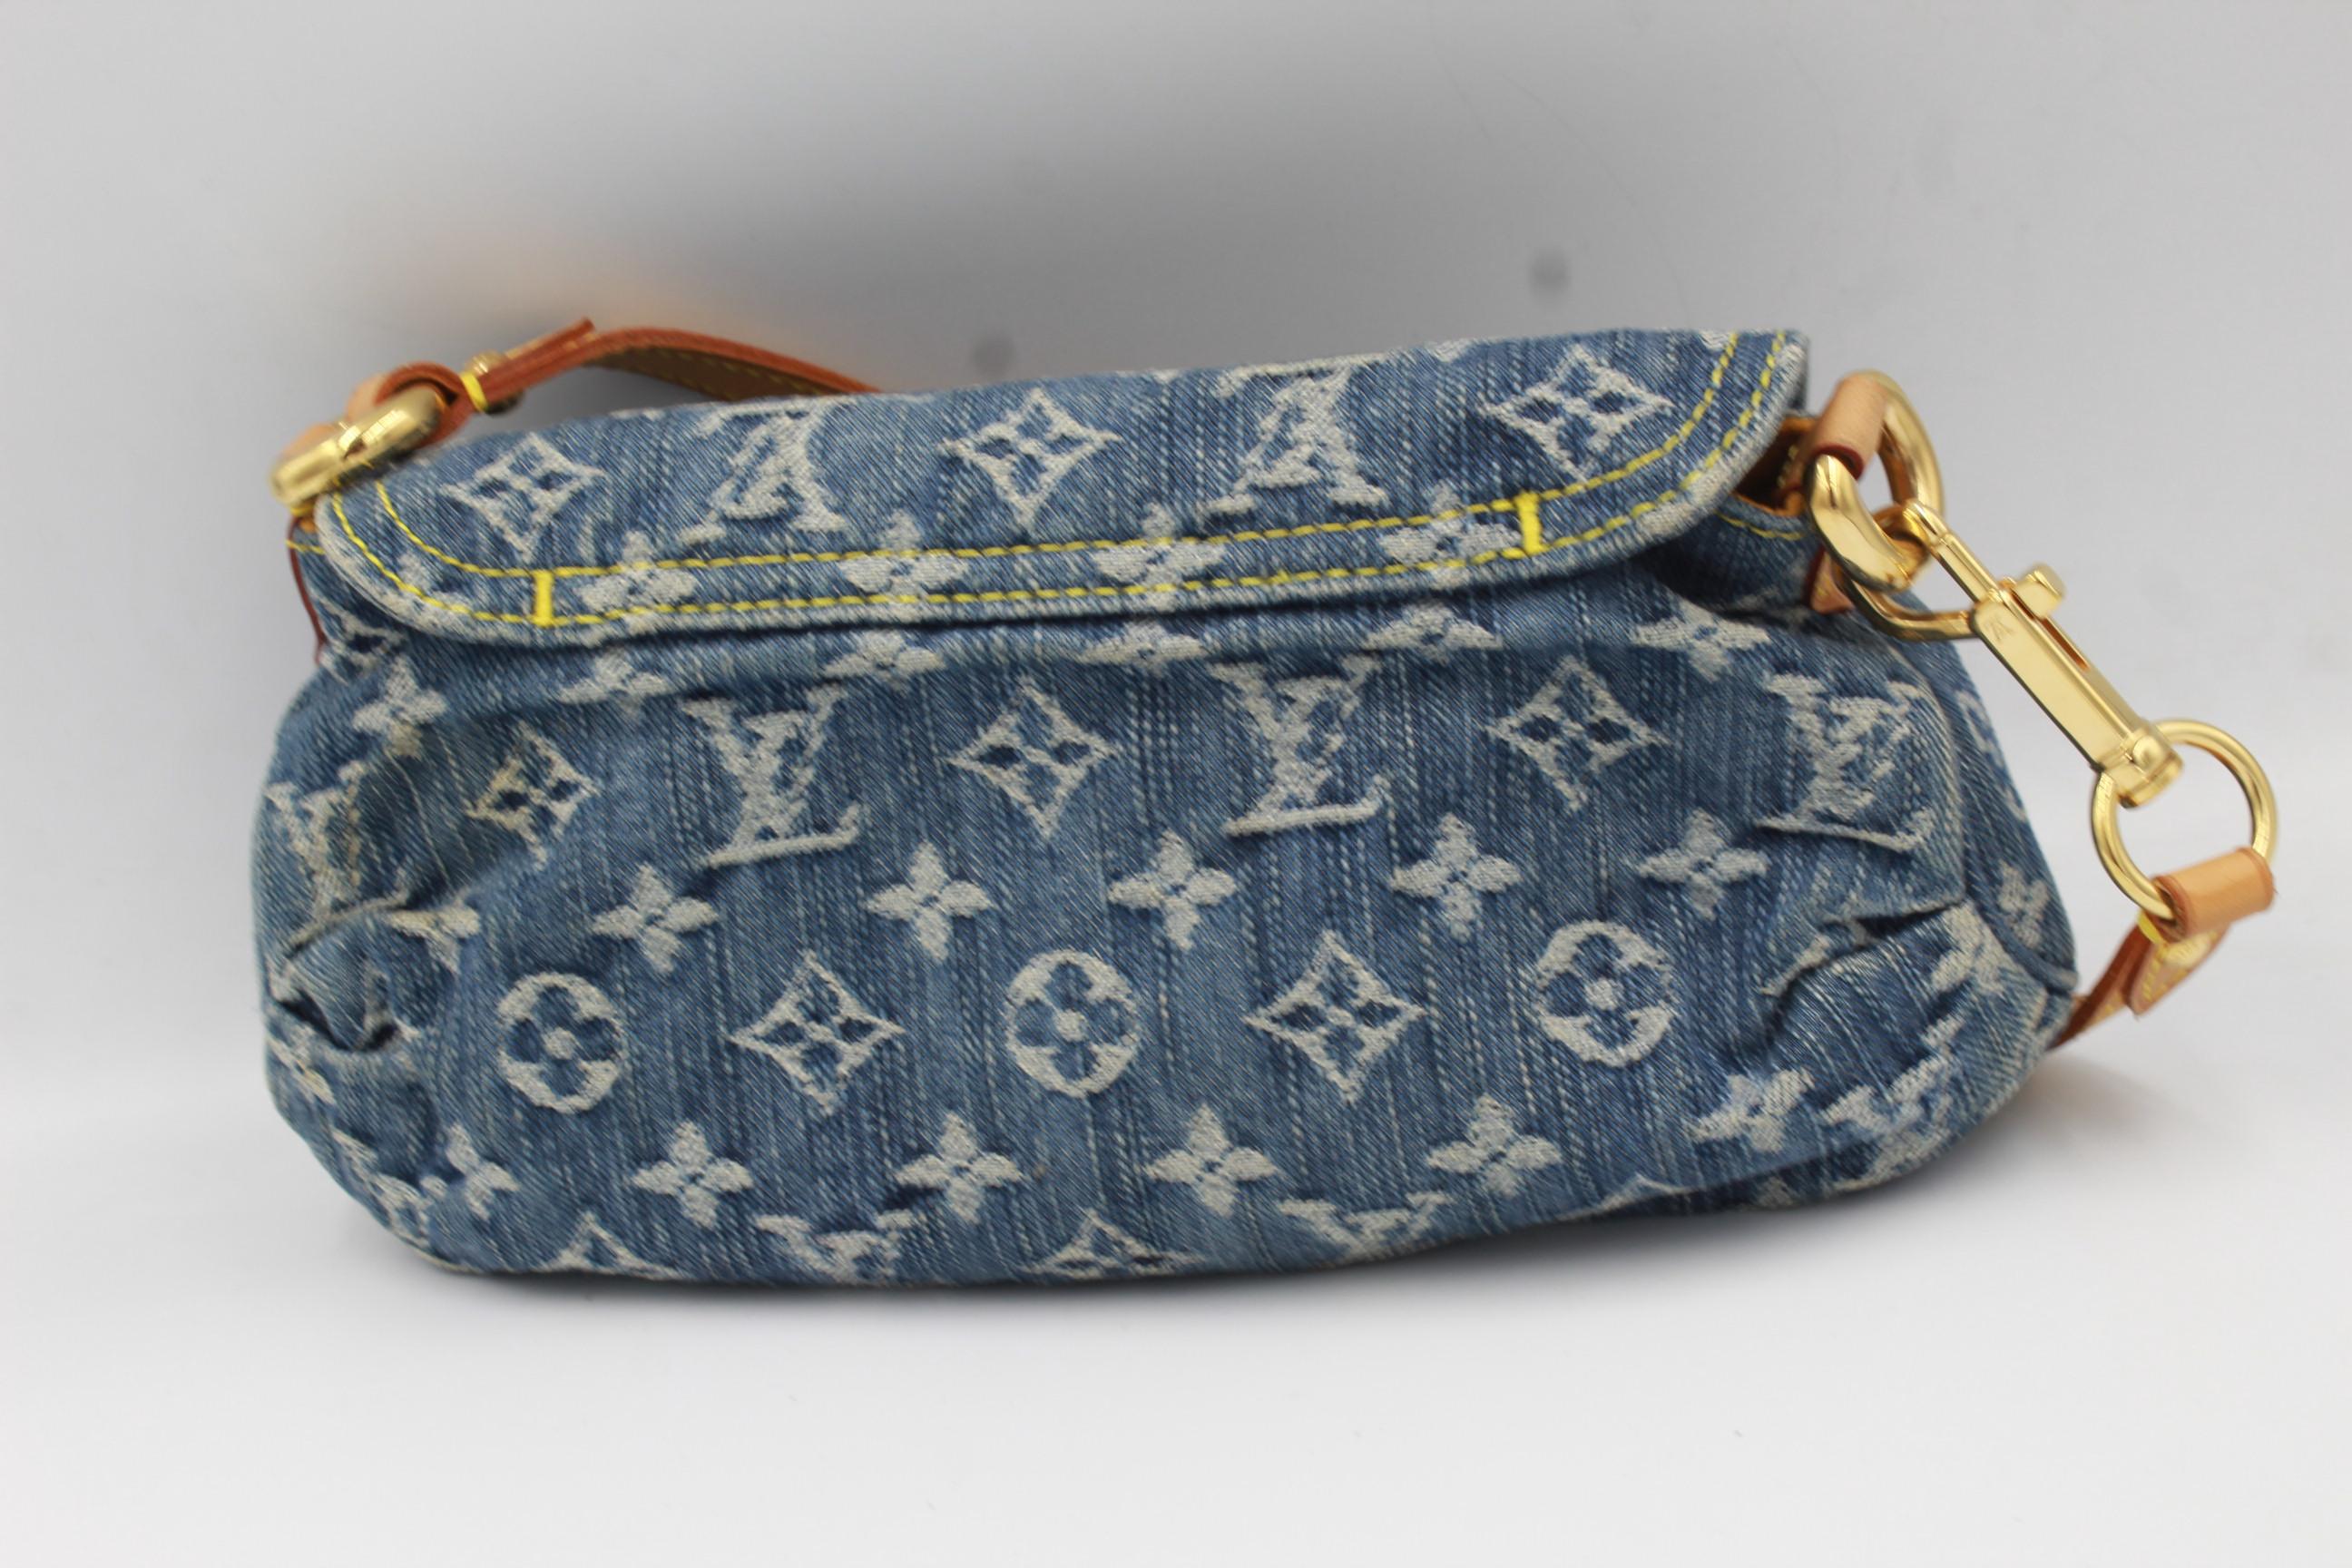 Louis Vuitton handbag in denim monogram.
Good condition, with some signs of wear in the inside ( ink ).
12cm x 25cm x 8cm
